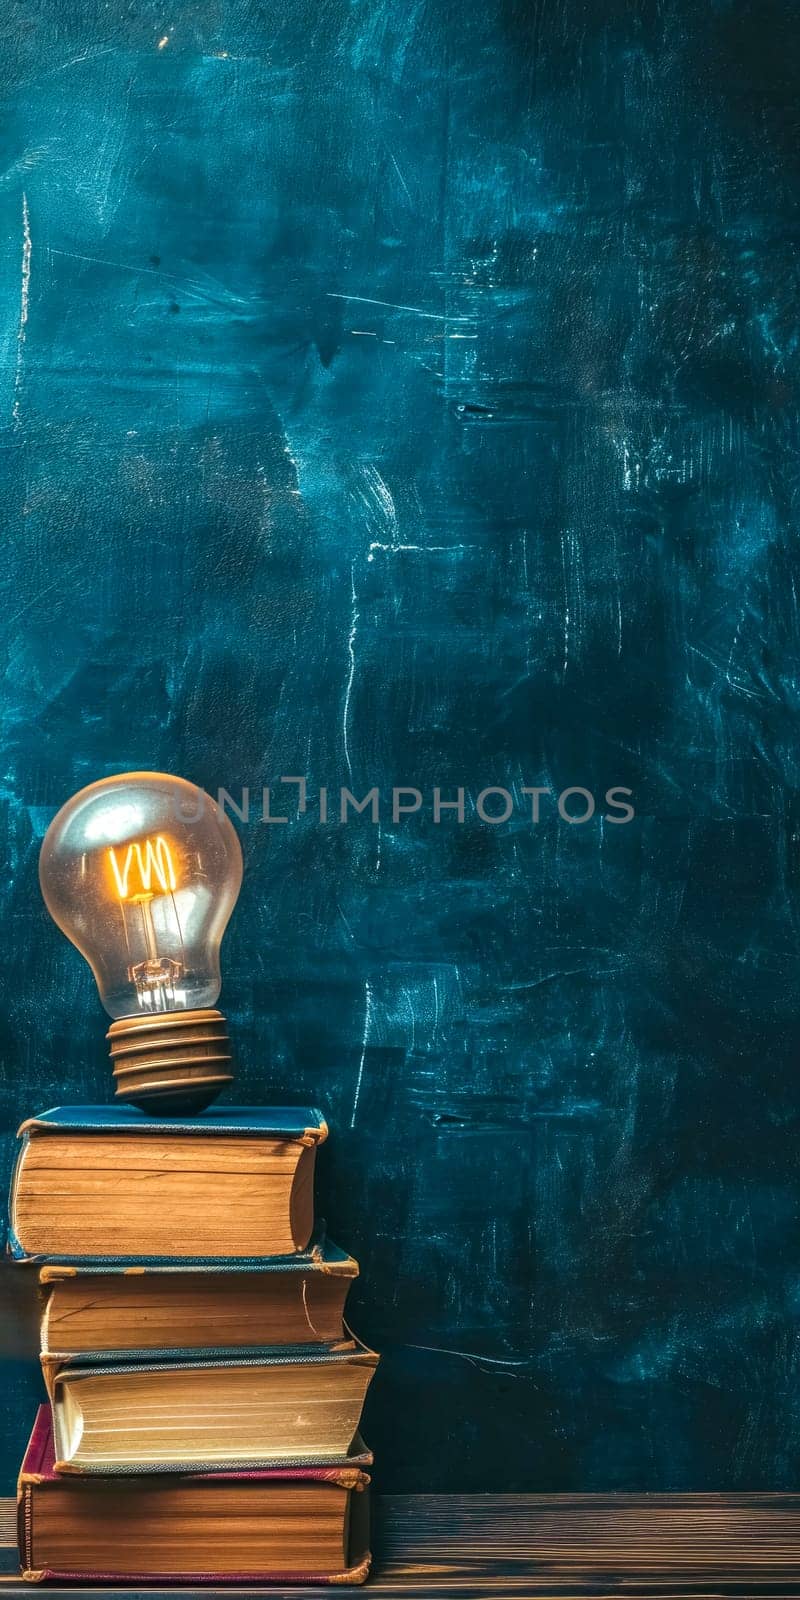 concept of inspiration and knowledge, featuring a glowing light bulb atop a stack of old books against a textured teal backdrop. by Edophoto